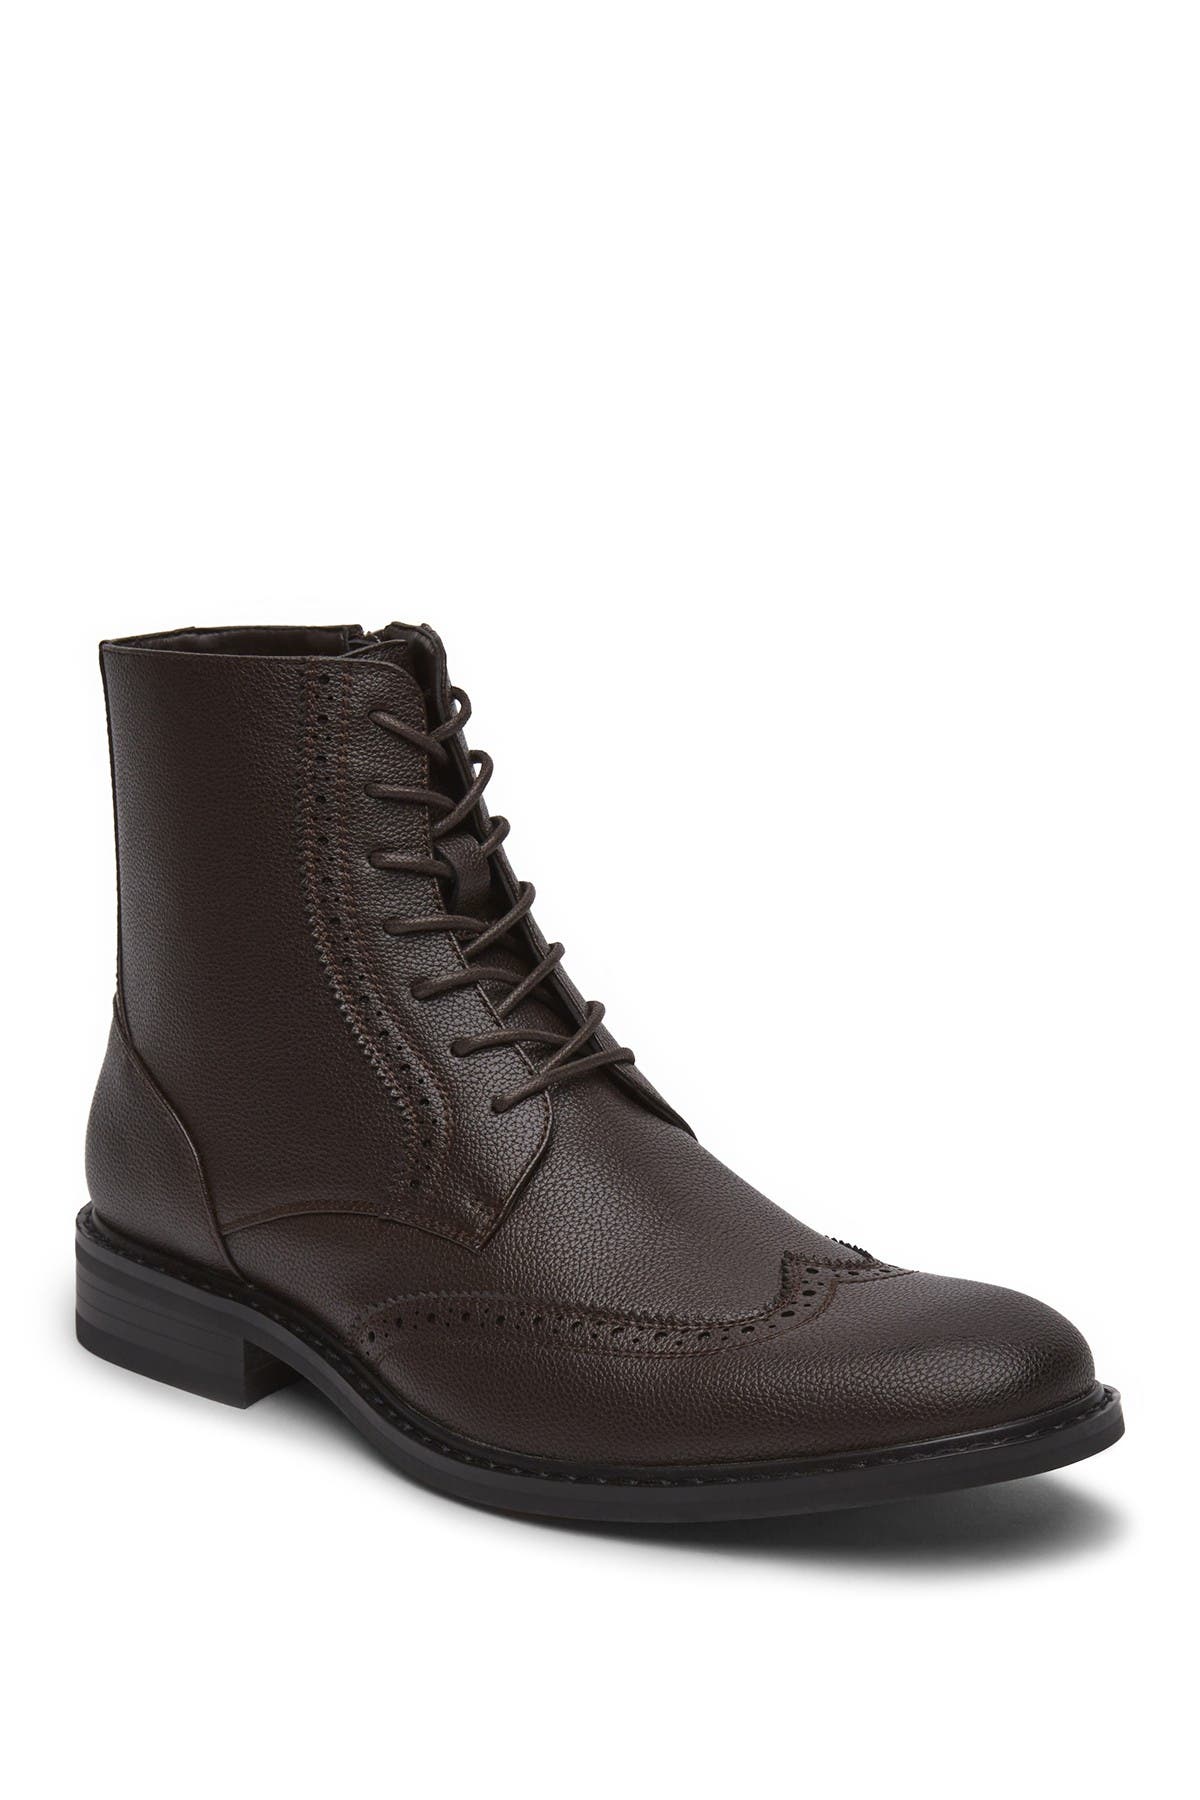 unlisted by kenneth cole men's buzzer boots